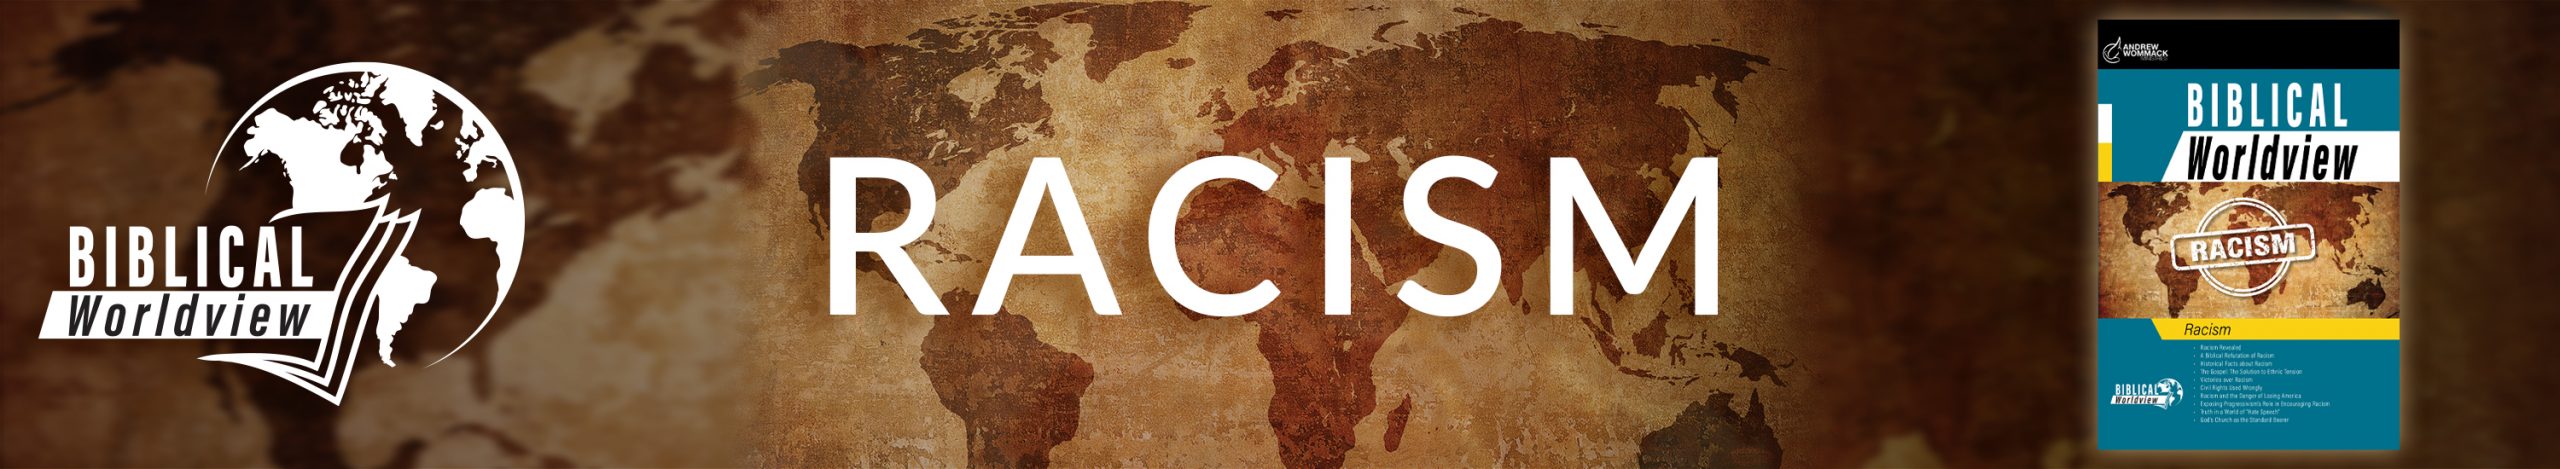 Biblical Worldview: Racism product offer banner